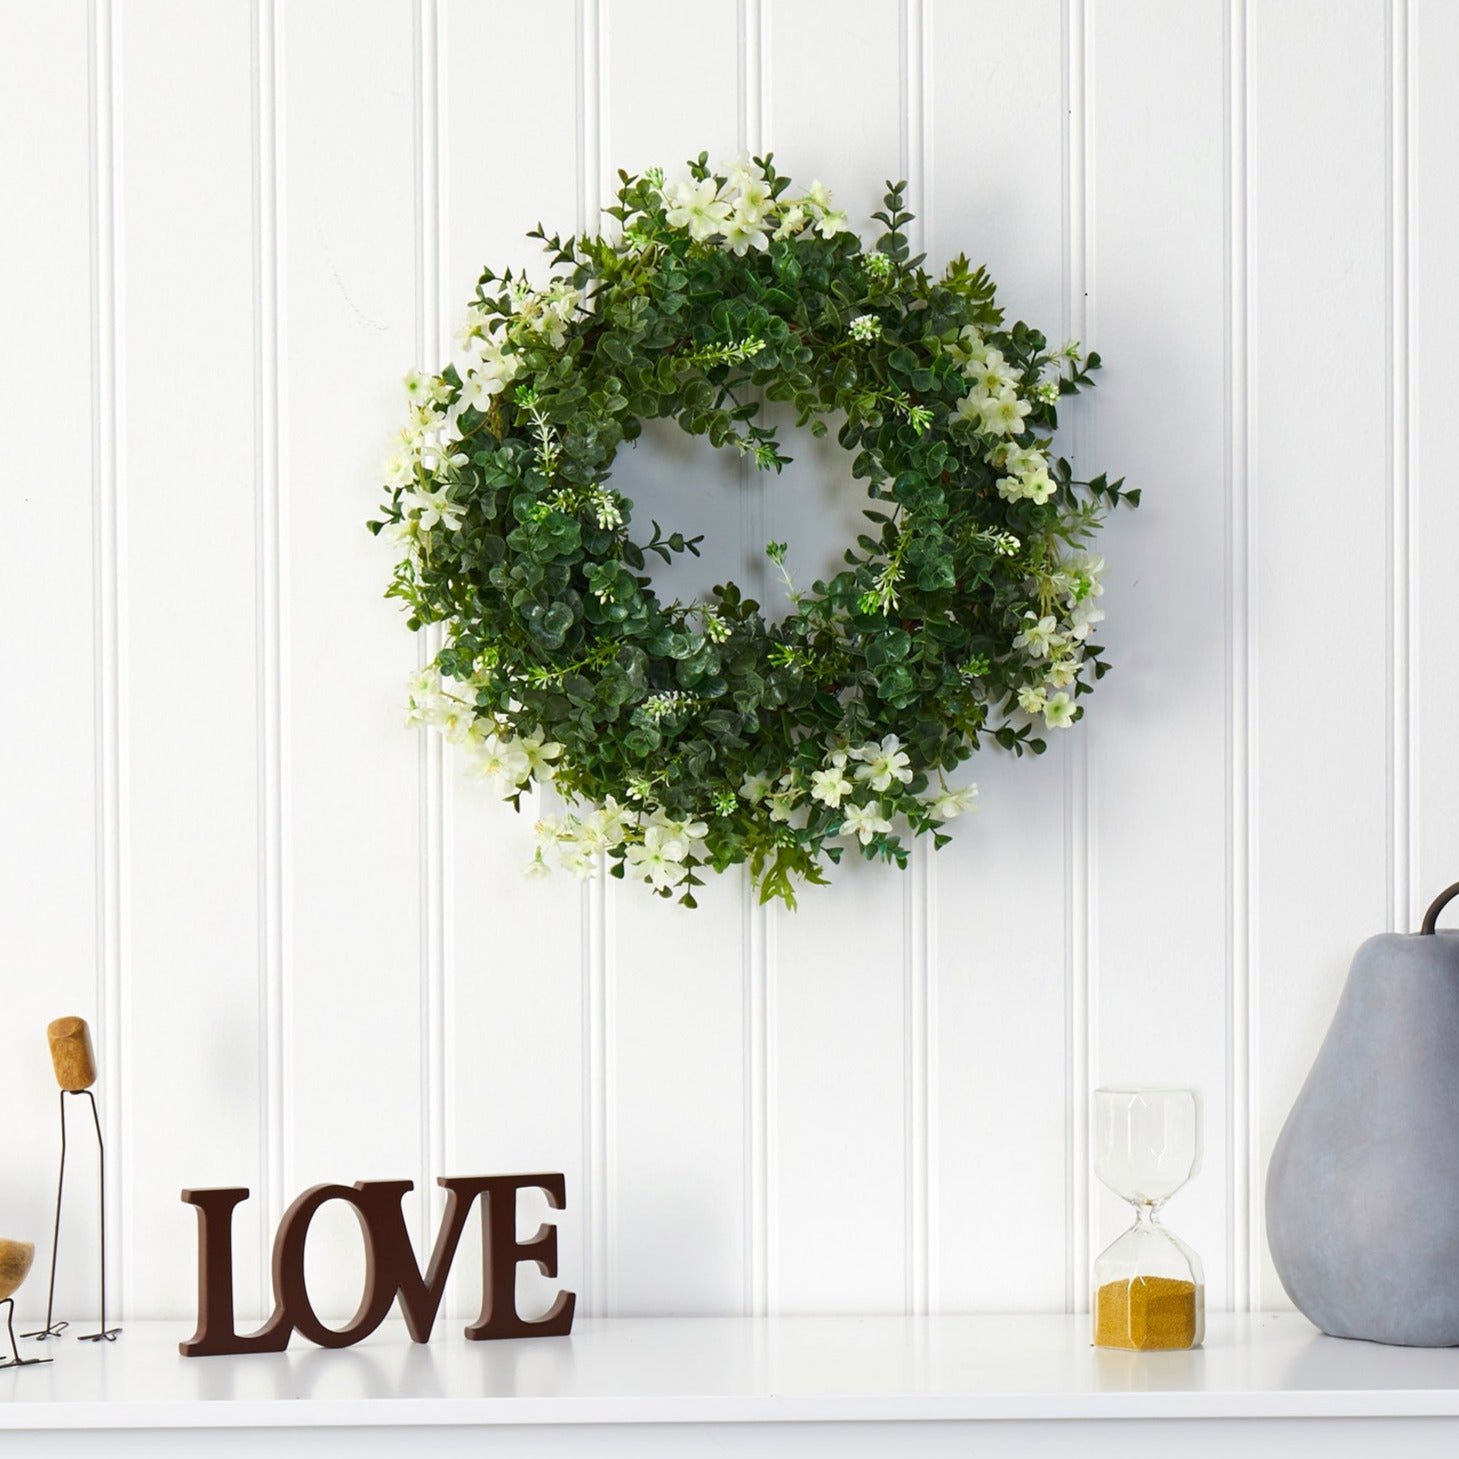 Eucalyptus and Daisy Double Ring Artificial Wreath with Twig Base, 18”